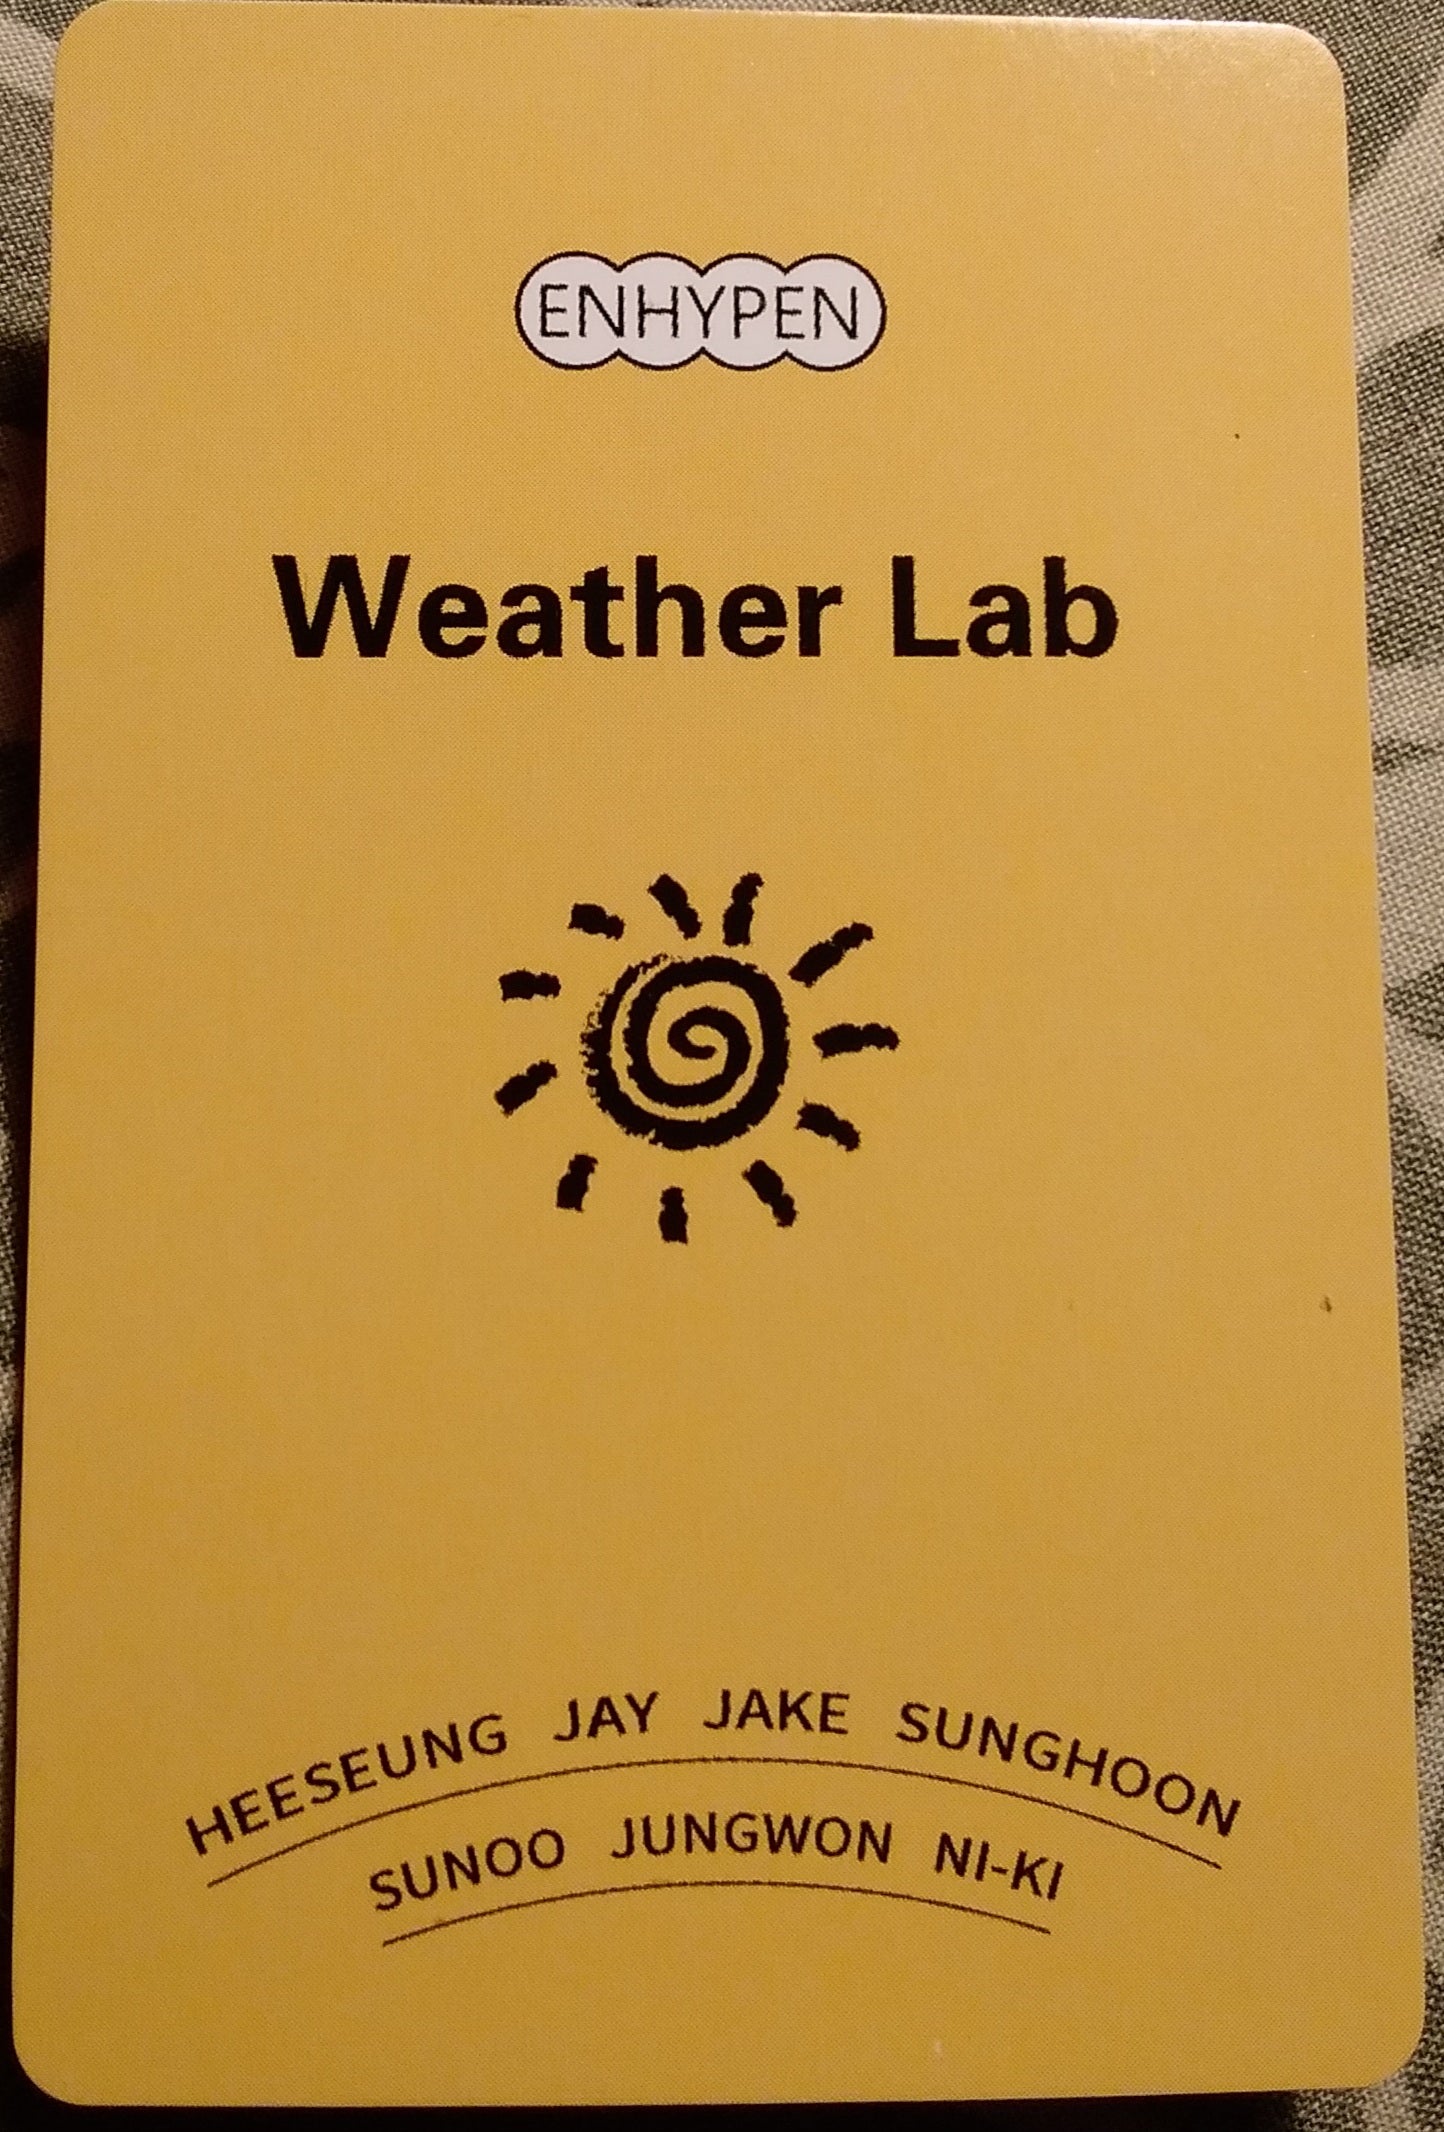 Photocard   ENHYPEN  Weather lab  Jay